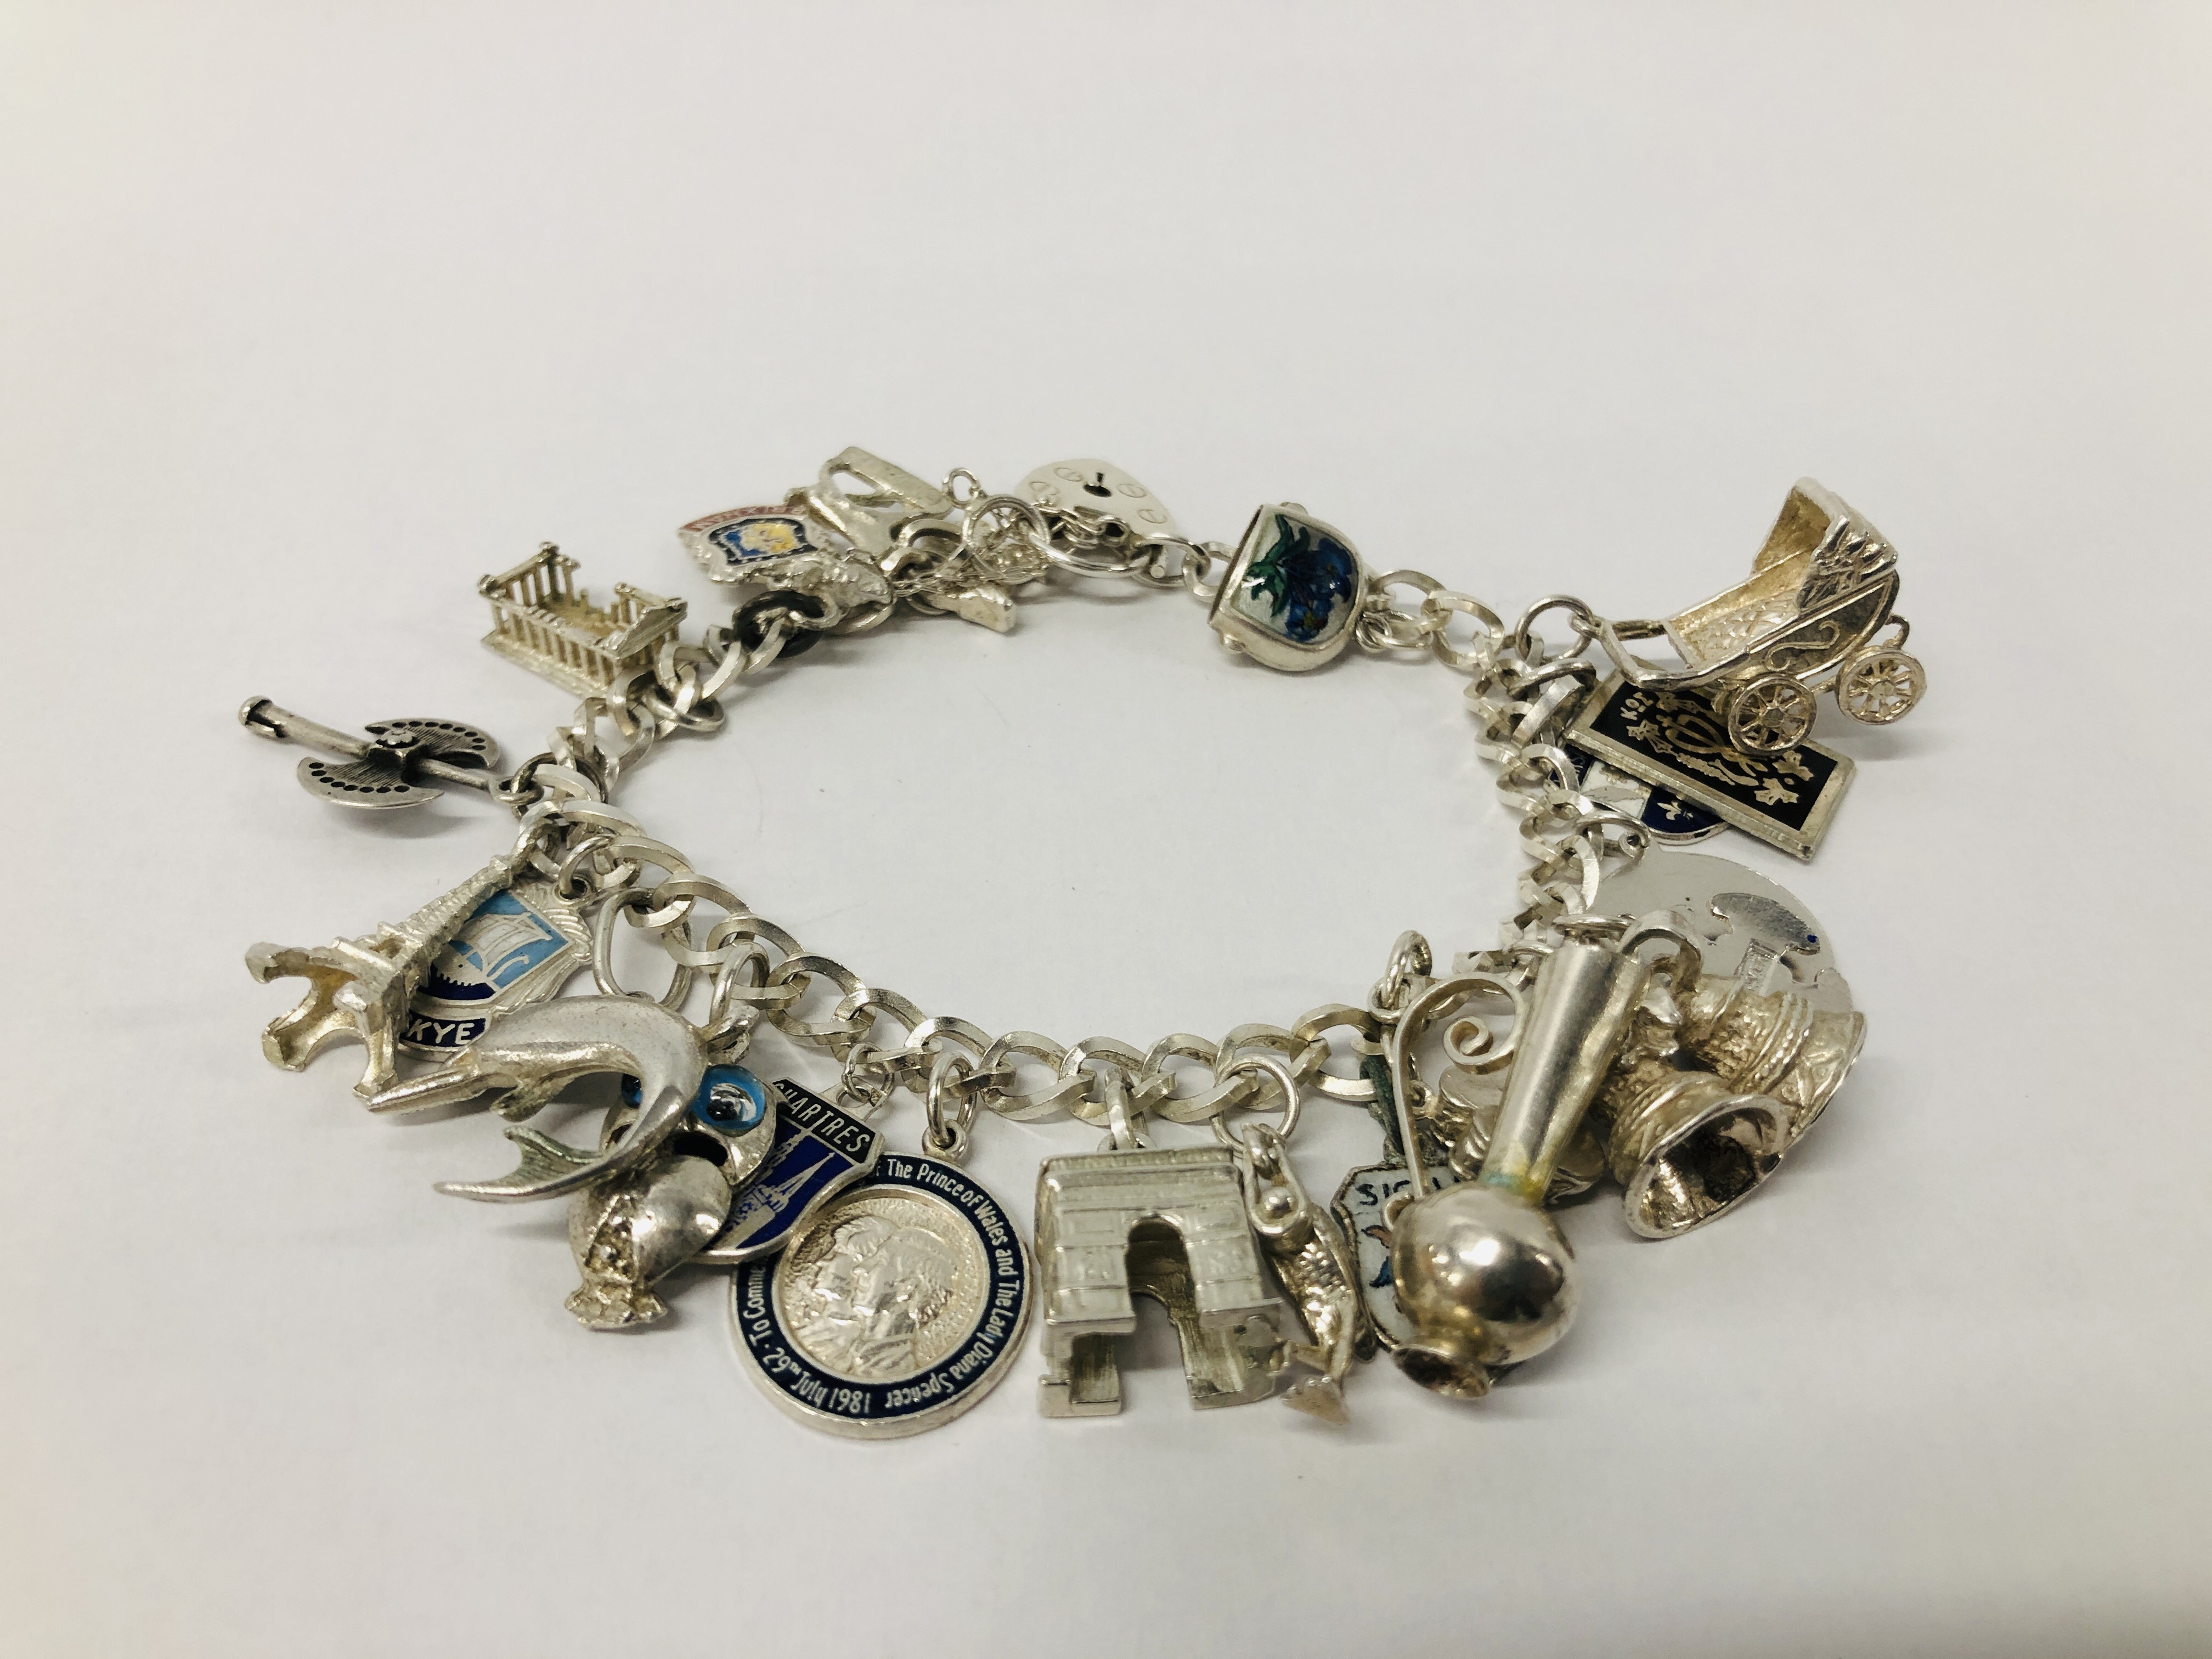 SILVER CHARM BRACELET WITH MULTIPLE CHARMS